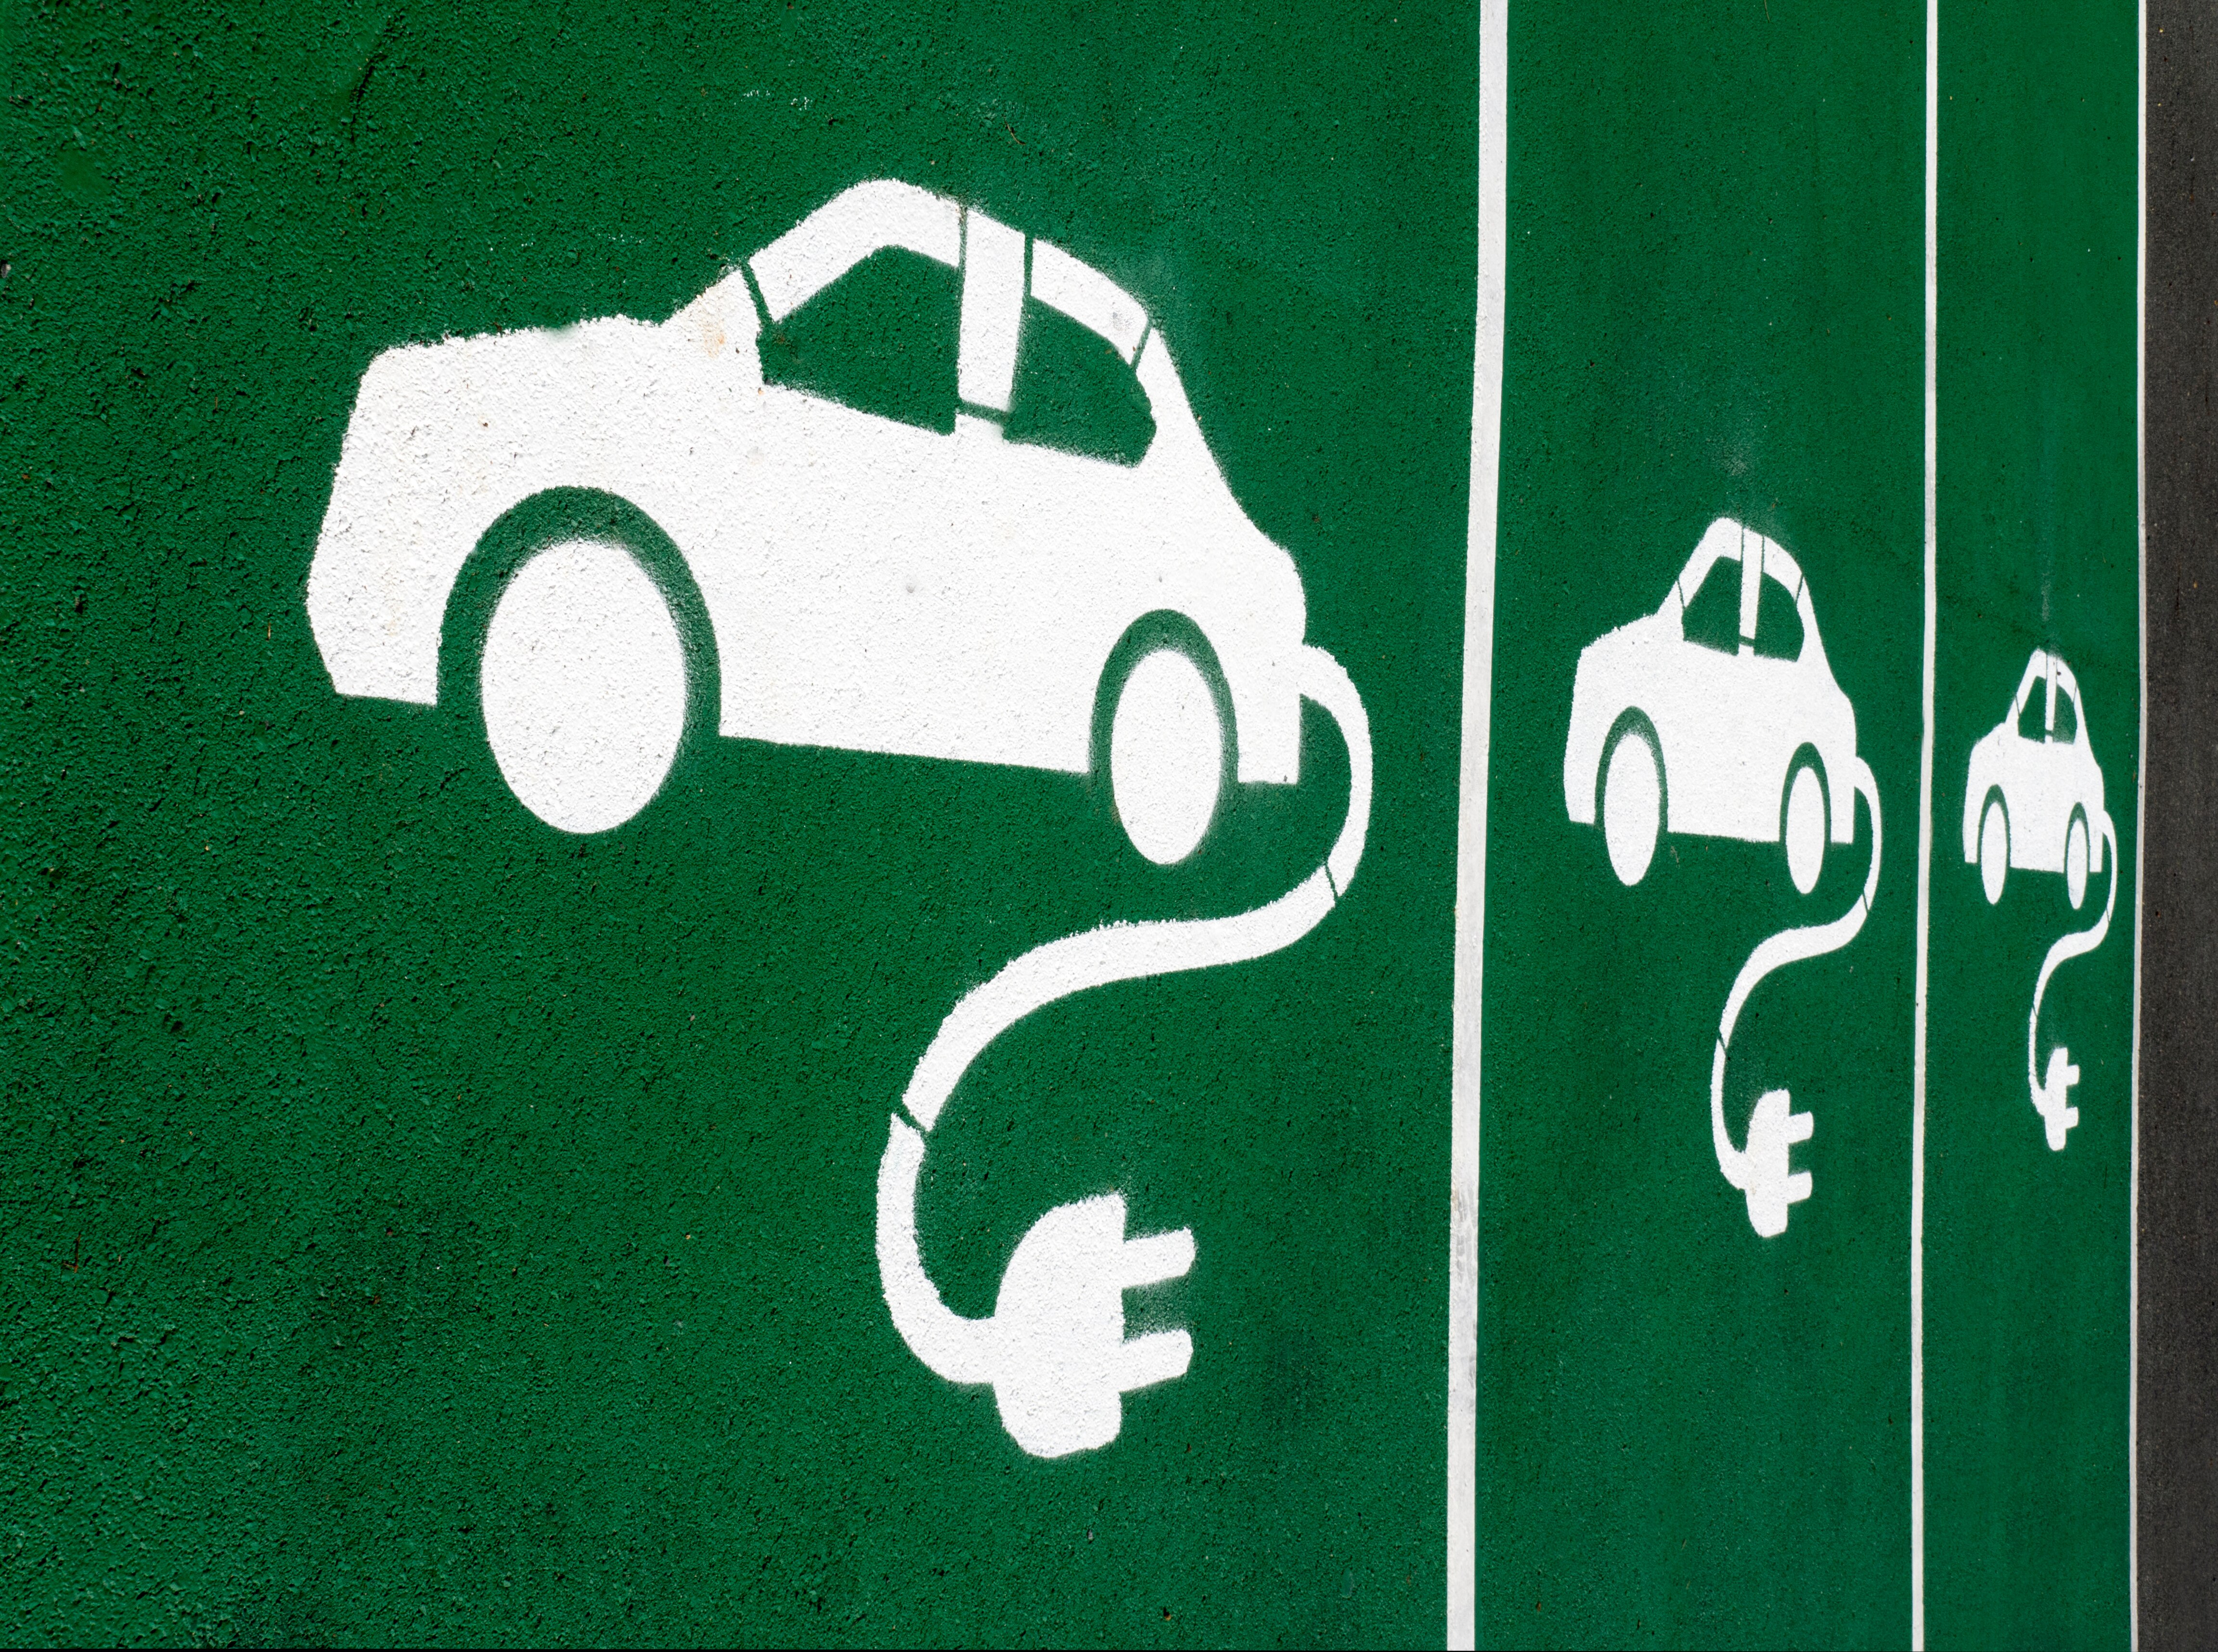 Should drivers of electric vehicles be taxed more to use the roads?